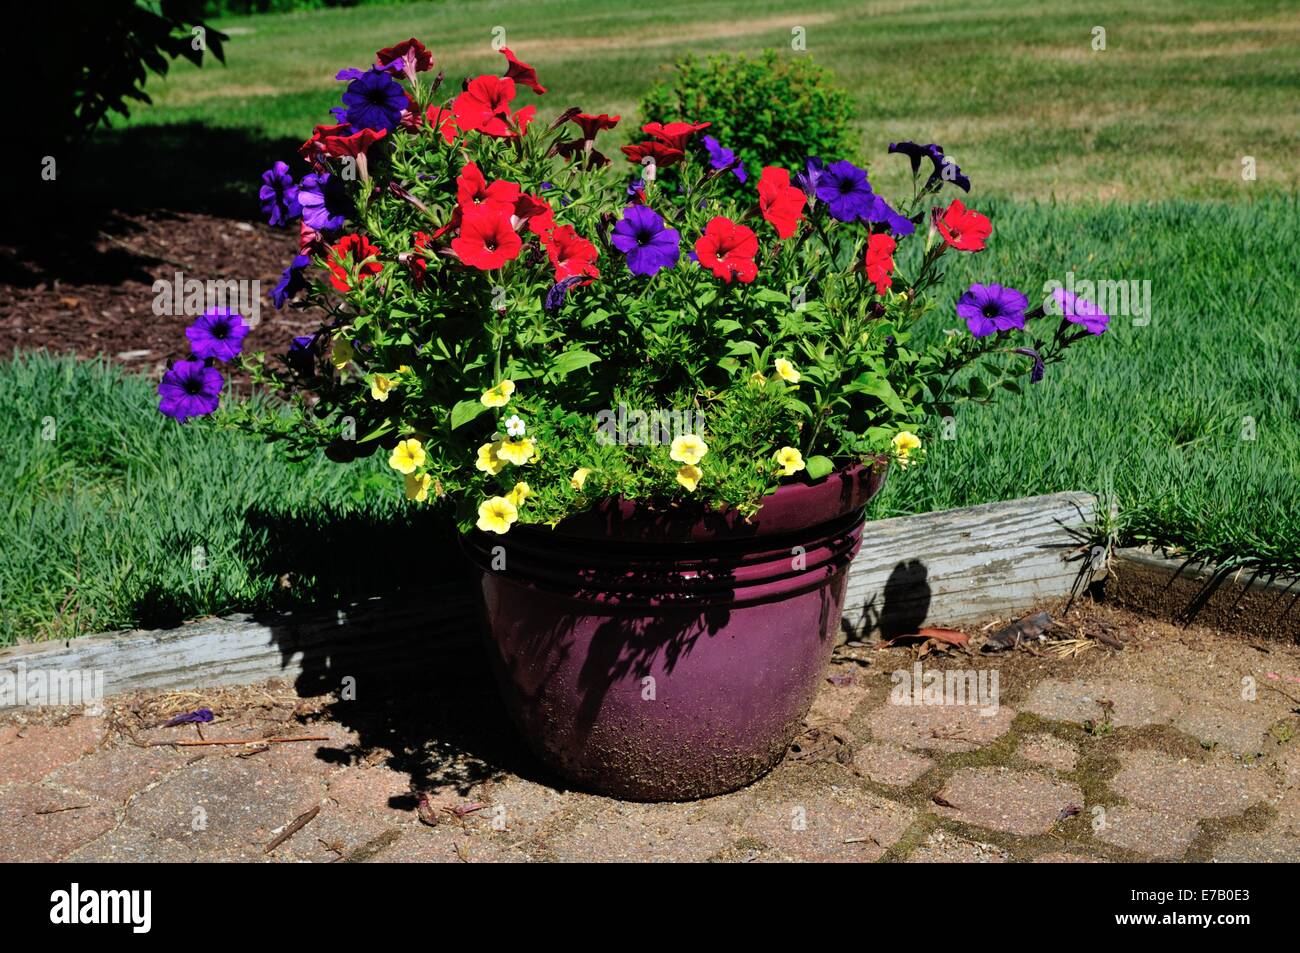 Large flower pot containing colorful flowers Stock Photo